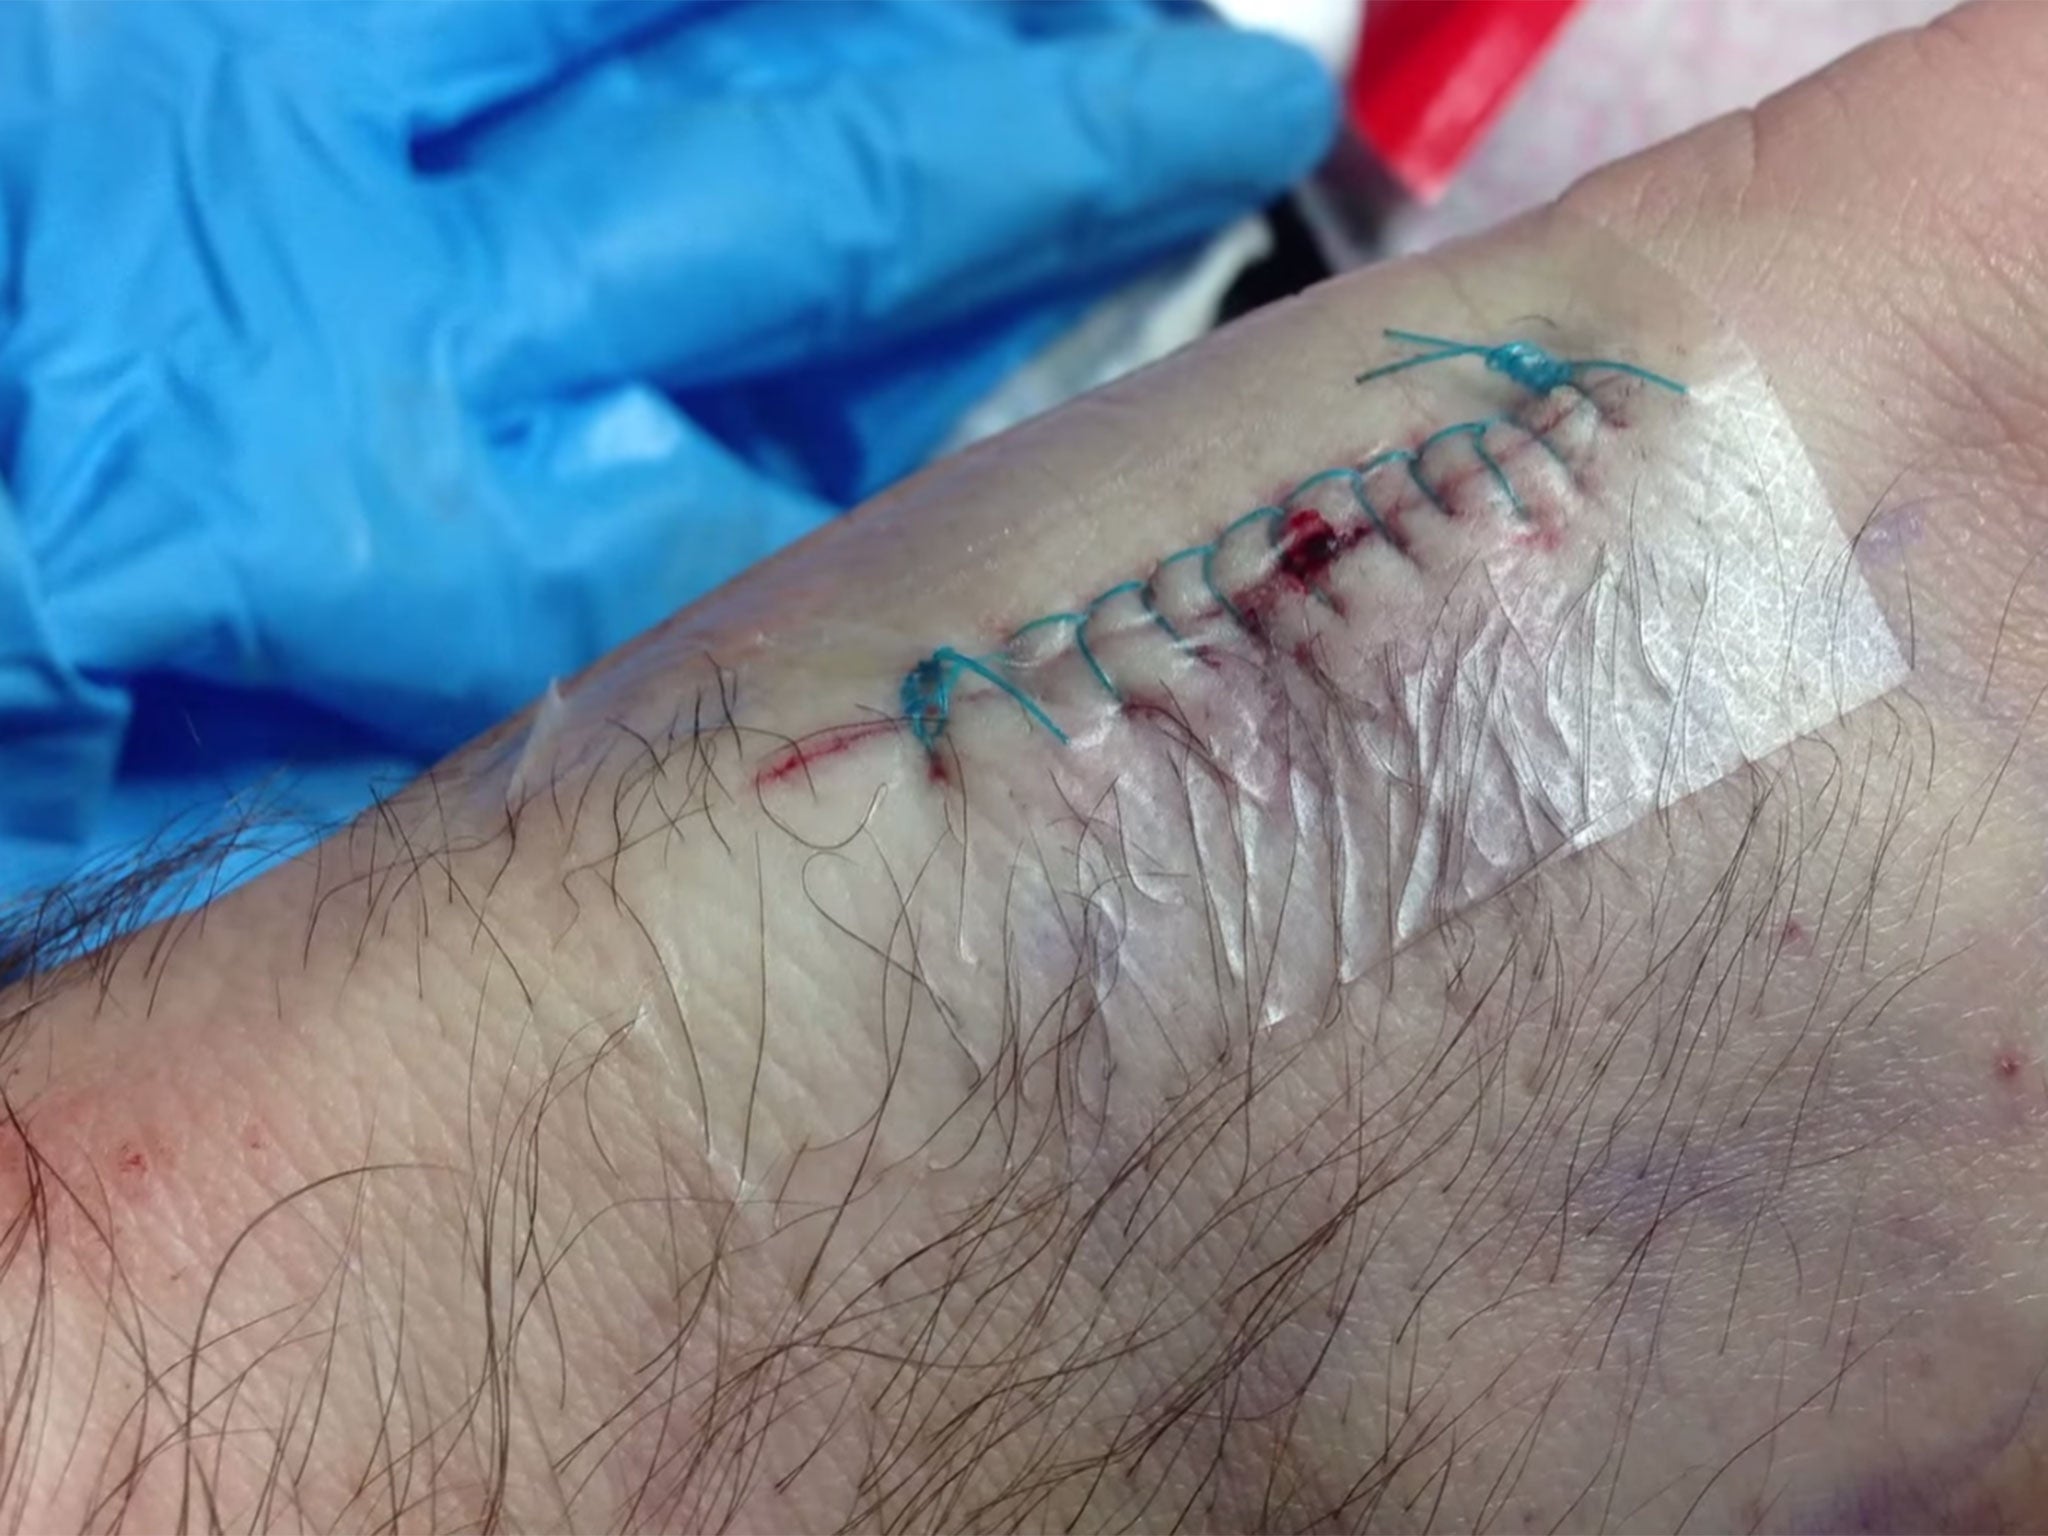 The scar Vlad Zaitsev was left with after implanting his travel card into his hand